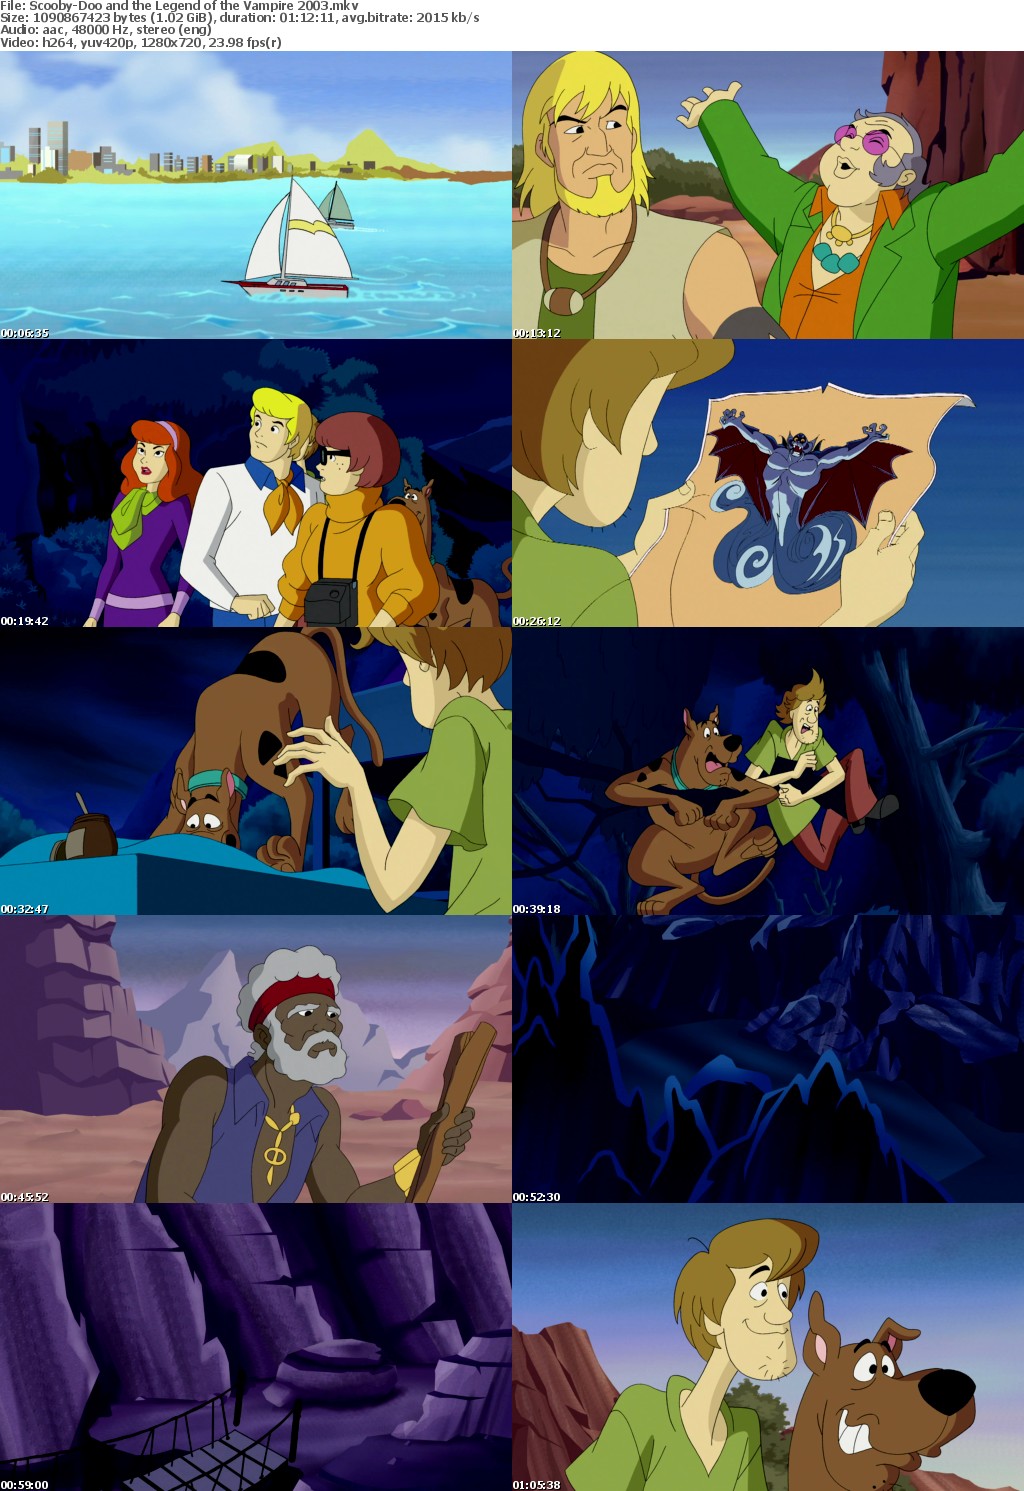 Scooby-Doo and the Legend of the Vampire 2003 720p BluRay x264 i c